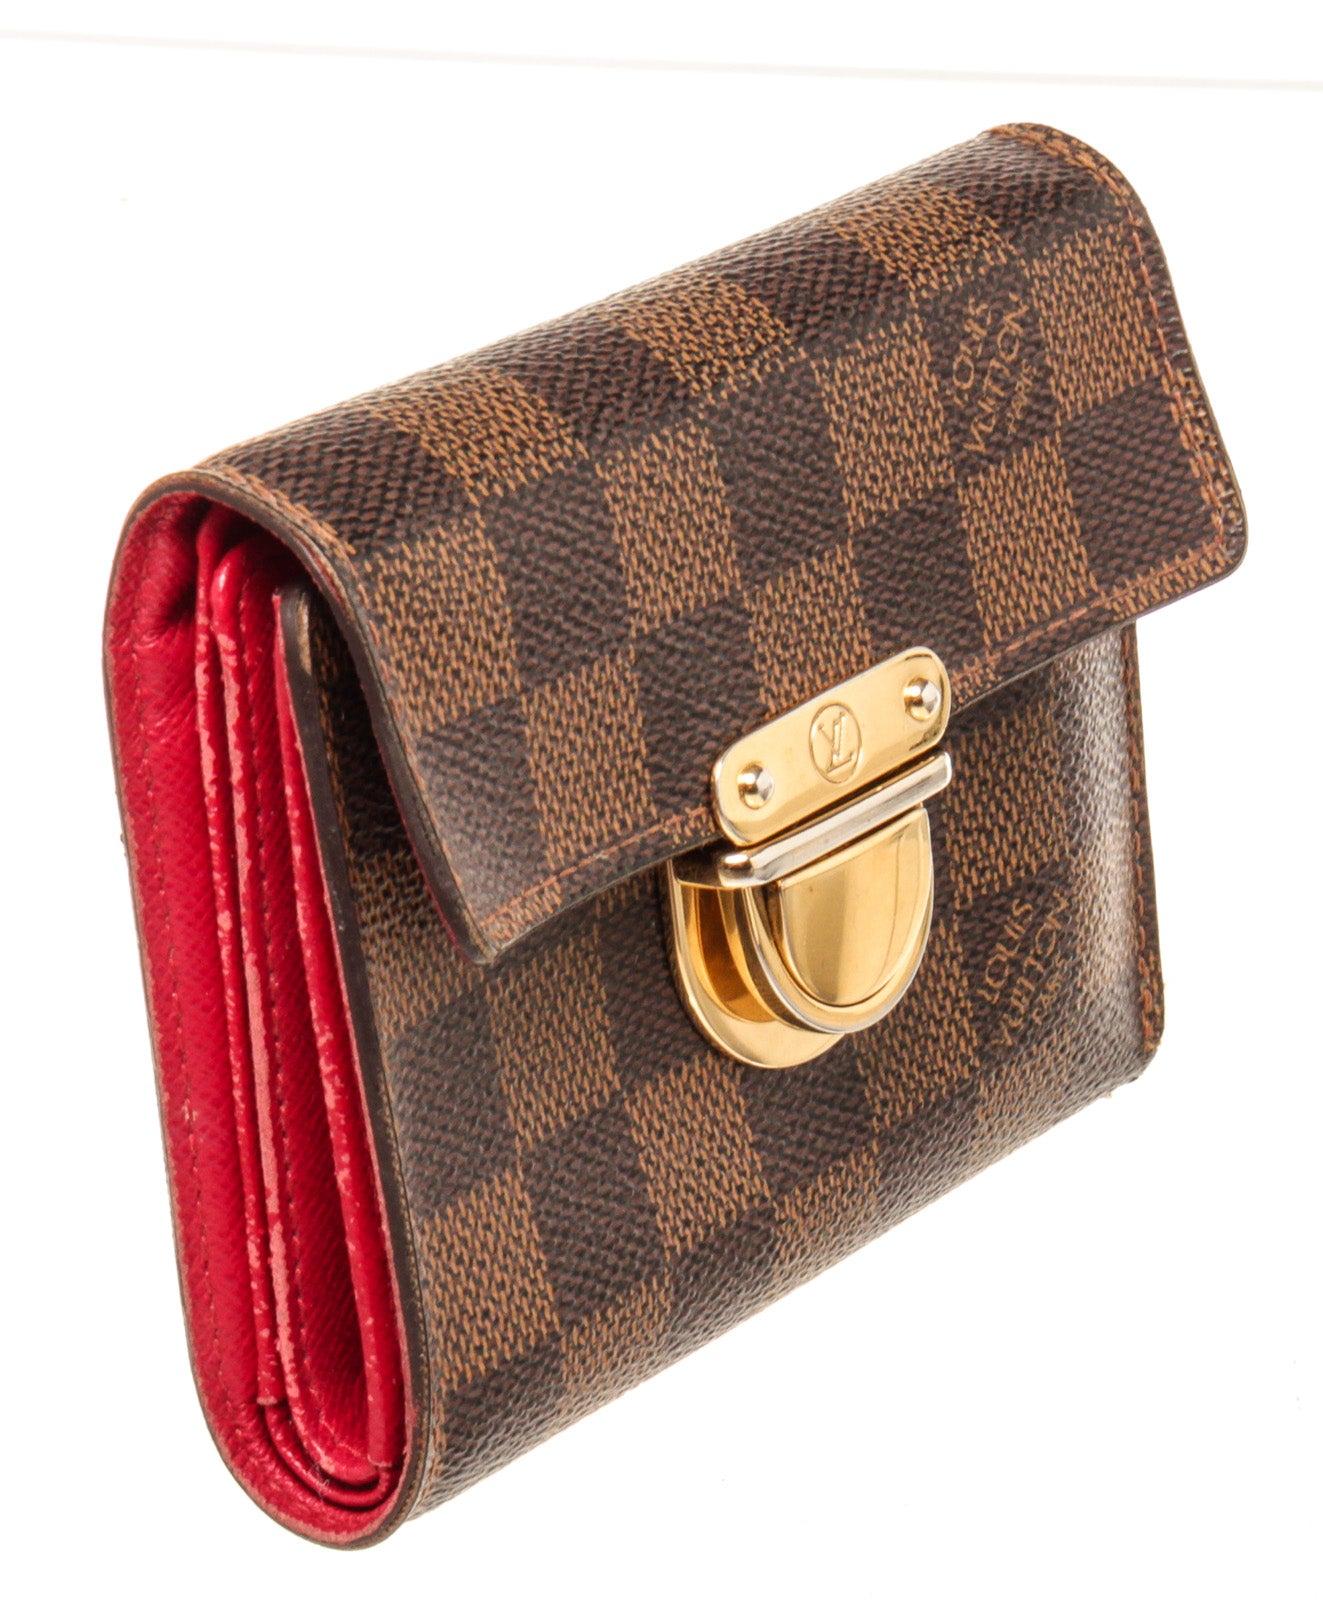 Louis Vuitton Brown Damier Canvas Joey Wallet with damier canvas, gold-tone hardware, embossed logo at front corner, interior zip pocket featuring dual slit pockets, single interior bill compartment, multiple slit pockets at interior walls and